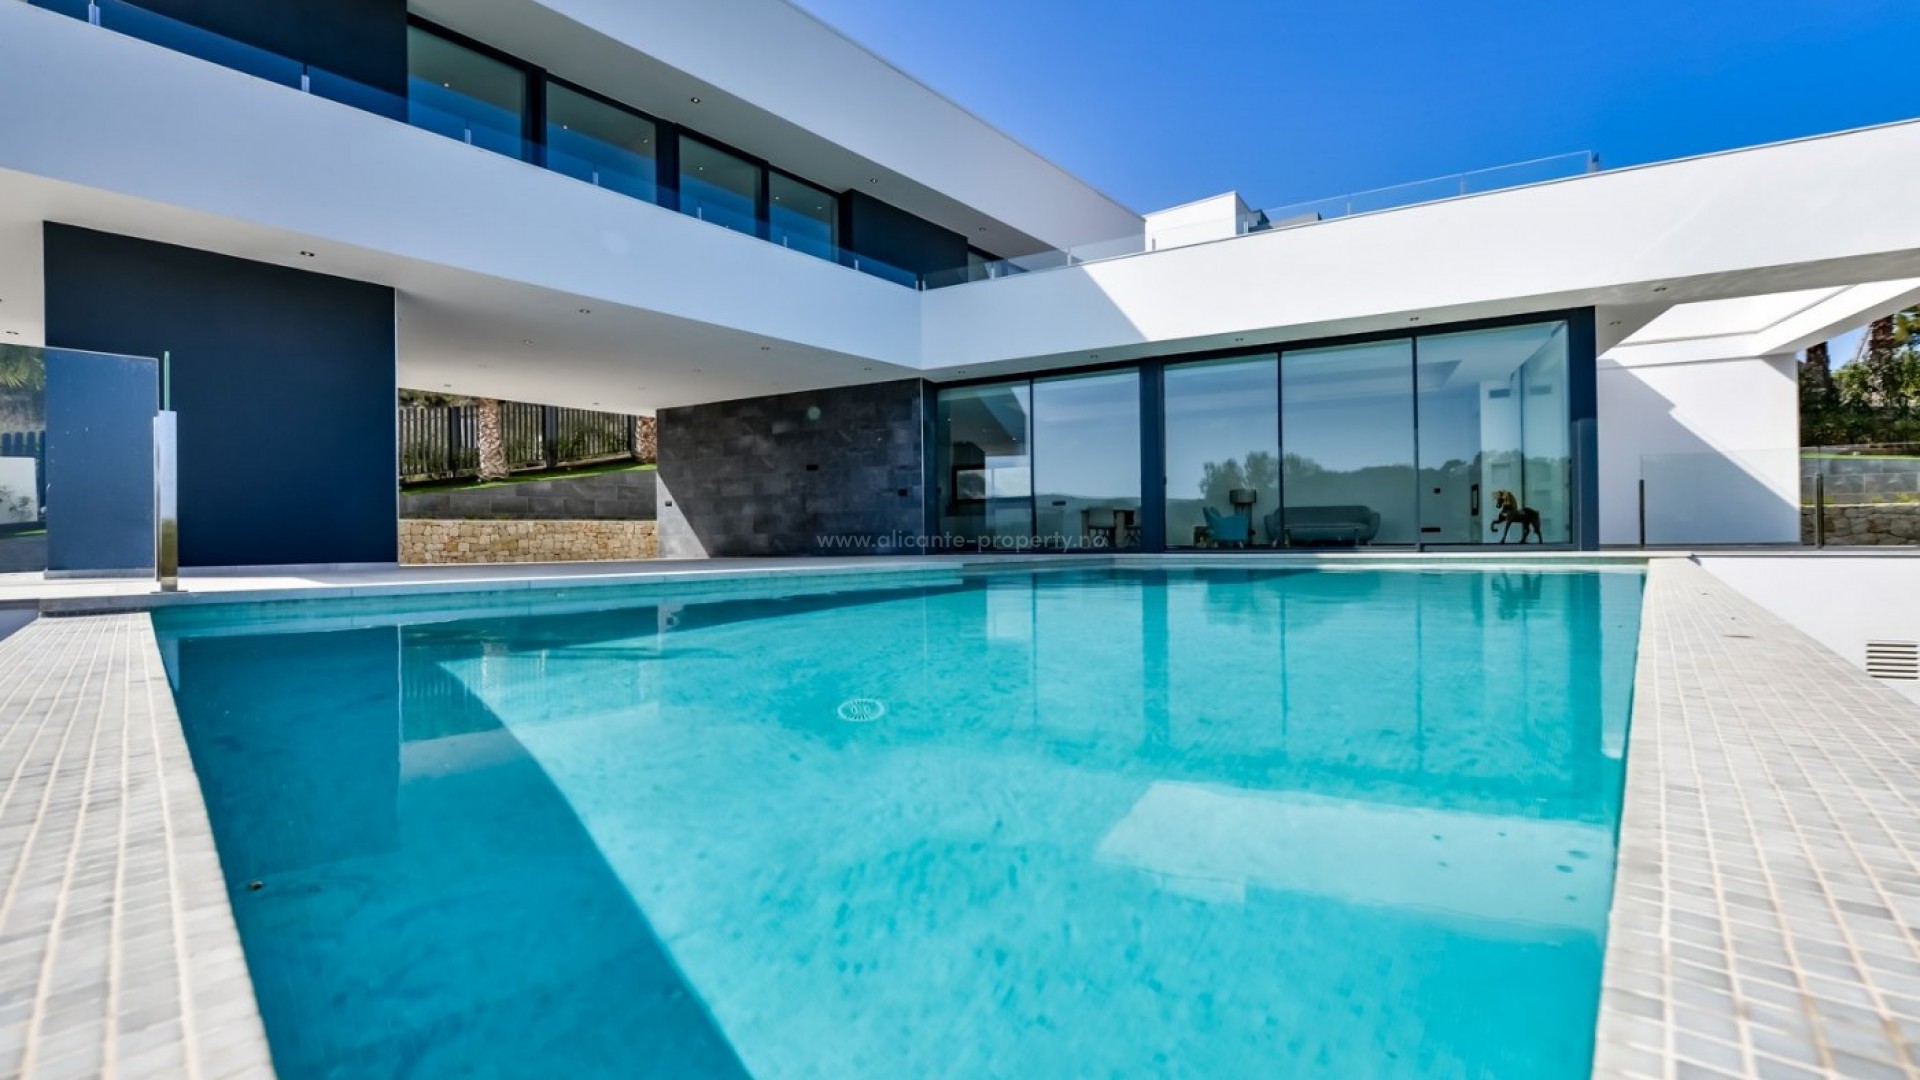 Modern luxury villa in Tosalet near Javea with sea view, 3 bedrooms, 3 bathrooms, swimming pool, large covered terrace with barbecue area